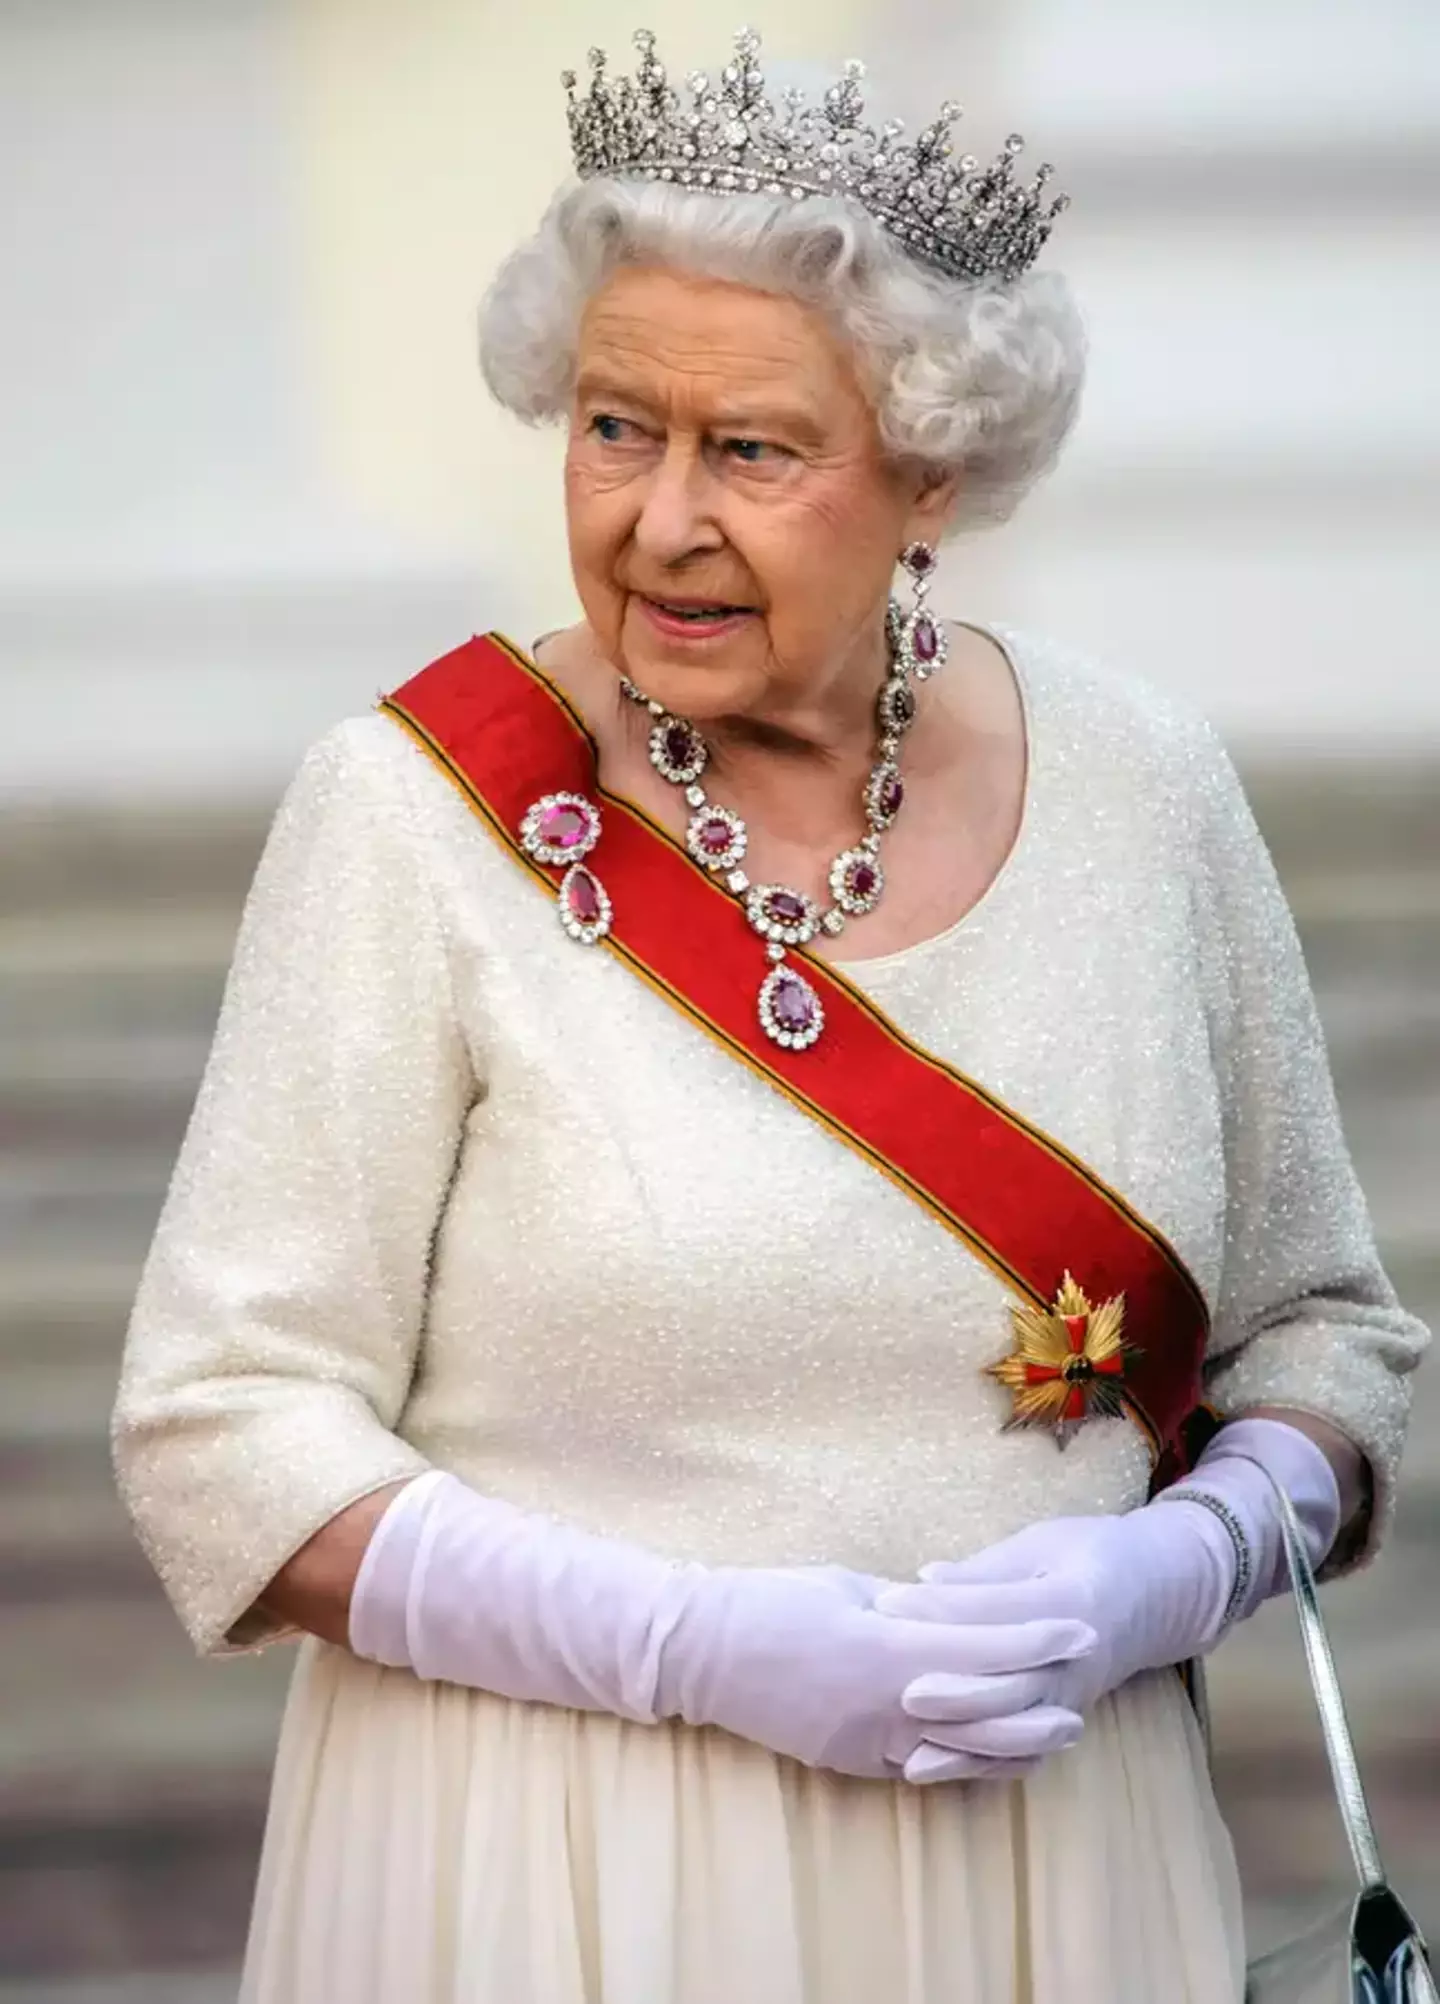 The Queen is the only Brit who doesn't need to hold a valid licence to drive.